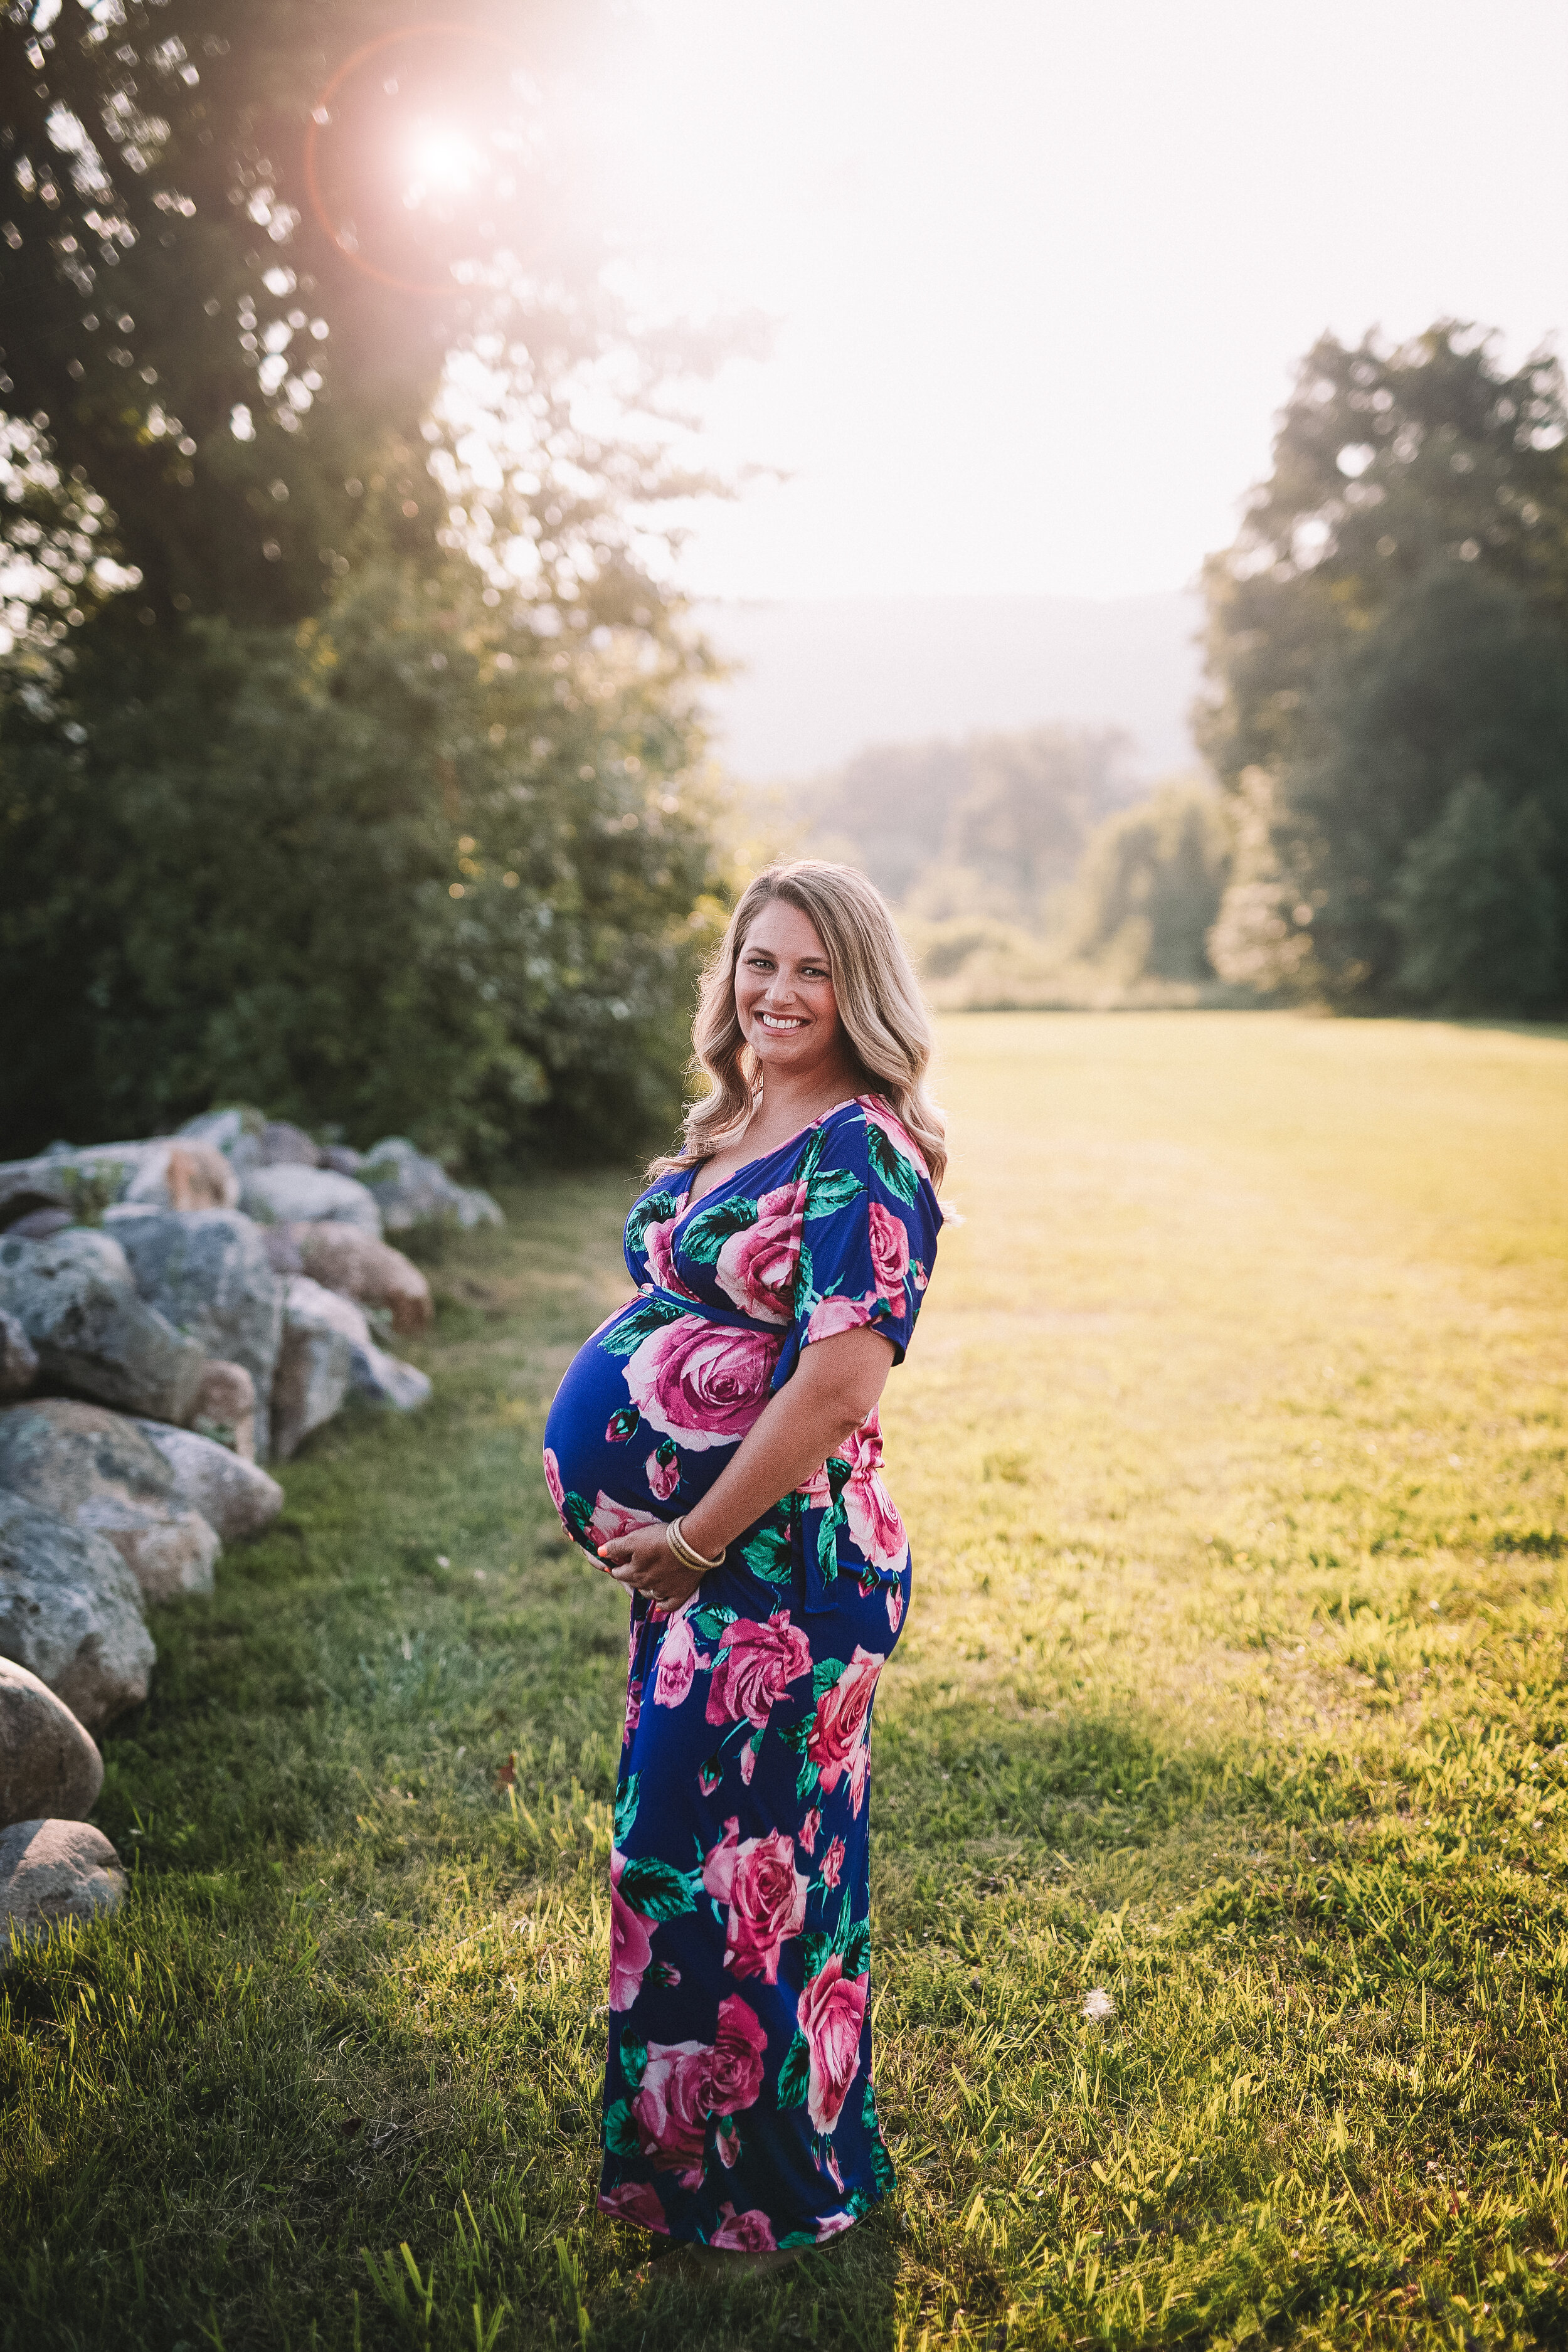  Blonde woman in blue and pink floral dress smiles for photographer during New Jersey maternity photoshoot 